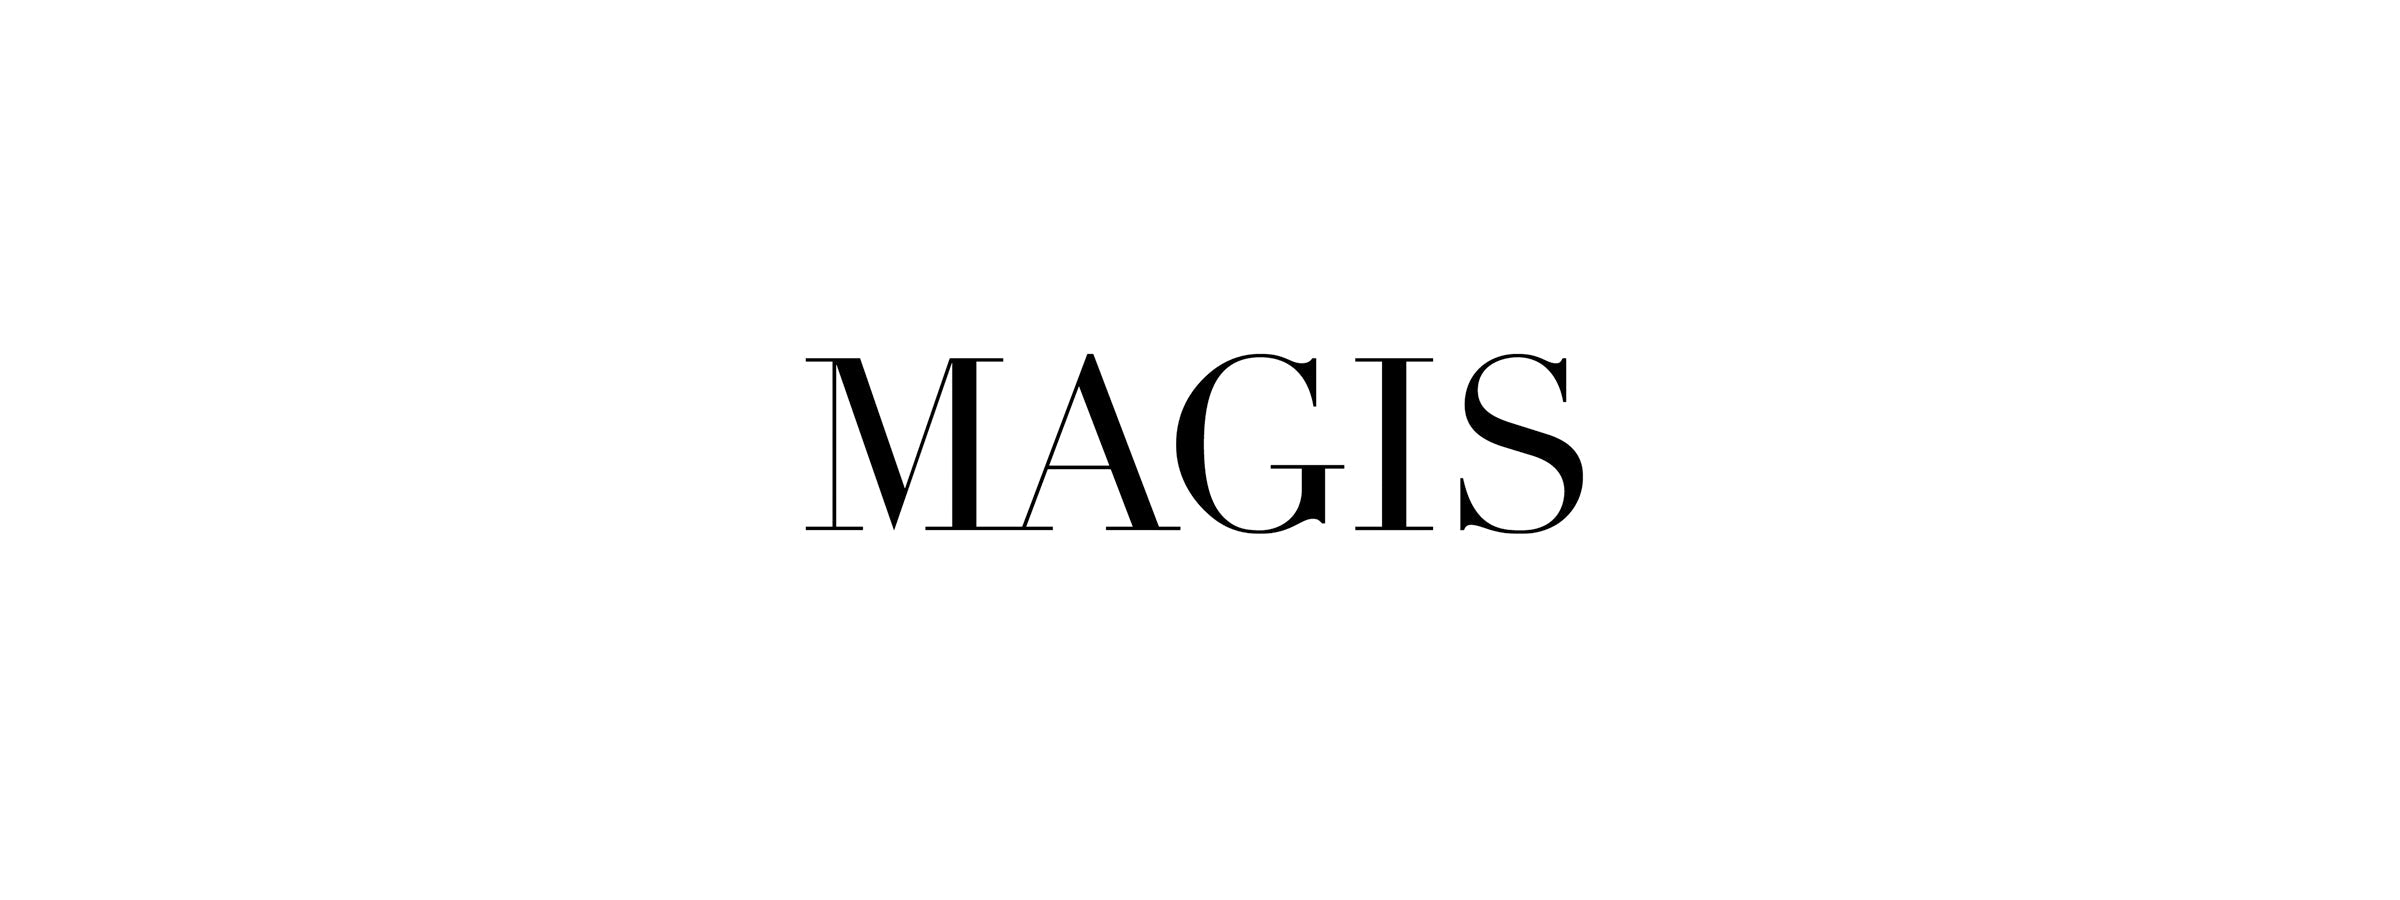 Magis: Innovation and Contemporary Design Solutions - Design Italy